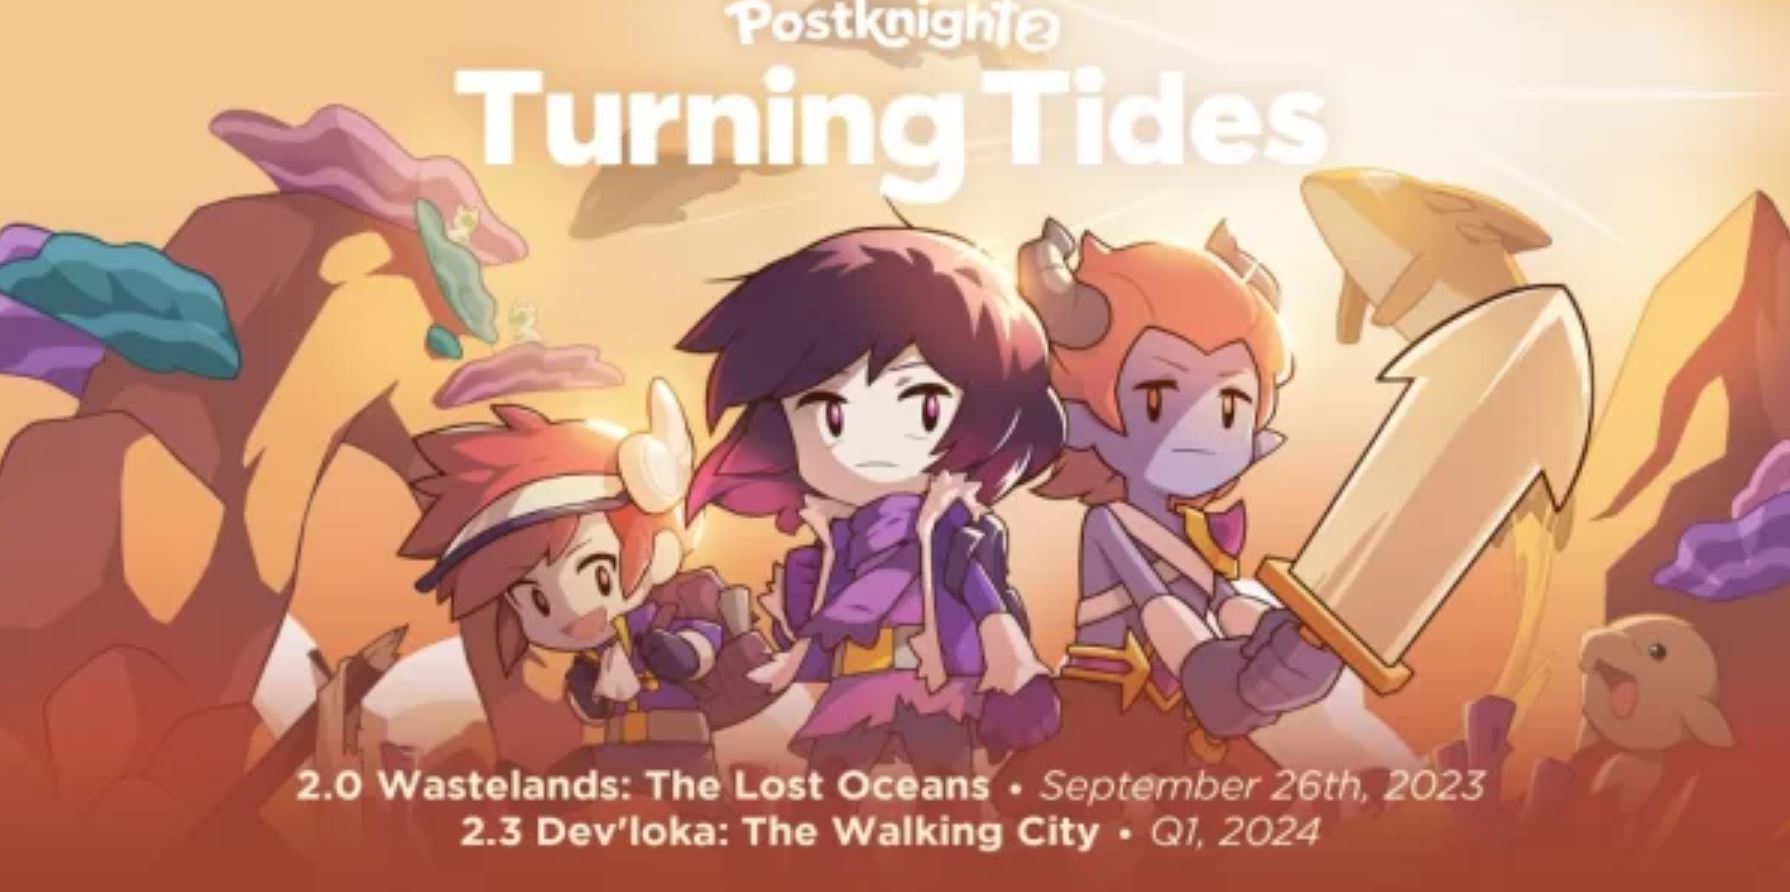 Prepare yourselves, brave adventurers! Kurechii, the creative minds behind Postknight 2, has just dropped a bombshell announcement that's set to make your gaming experience even more thrilling. They're rolling out a massive content update titled "Turning Tides," and it promises to be an absolute game-changer. Get ready to embark on new journeys, face formidable foes, and explore uncharted territories in the world of Postknight 2. This update is so monumental that it's being rolled out in two separate patches. The first installment, known as "version 2.0 Wastelands: The Lost Ocean," is scheduled to hit your screens on September 26th. But that's not all; the excitement doesn't stop there. The second part, "version 2.3, Dev’loka: The Walking City," is set to arrive in Q1 2024. It's a whole new chapter in the Postknight 2 saga, and it's coming your way soon. But that's not all; the Turning Tides update also brings great news for language enthusiasts. When this patch is unleashed, Postknight 2 will be playable in even more languages, making the game accessible to a broader audience. Postknight 2 Updates Comes with Tons of Rewards! As if that weren't exciting enough, in celebration of this monumental update, players can look forward to a bounty of rewards. Coins, Crystal Gems, and other treasures will be generously bestowed upon all players over the next two weeks. It's time to gear up for the ultimate adventure! A mysterious relic lies hidden deep within the blazing heat of the Helix desert. Guarded by the formidable Wyords, a dragon-like race armed with guns and knives, this relic is the focal point of your quest. But you won't be embarking on this perilous journey alone. Joining you are the enigmatic Postknight Raz, the passionate Almond, and Rho’don, the idealistic Wyord Wayfinder. Together, you'll brave the unforgiving wastelands, uncovering the artifact and unearthing the secrets of Helix's history. As you navigate this treacherous region, you'll discover not only the hidden truths of your world but also unexpected revelations about yourselves. The Turning Tides update is more than just a new adventure. It also reintroduces the Division Campaign from the original game, complete with fresh mechanics that allow you to expand your squad by hiring Team Recruits. This means more tactical gameplay and strategic depth. Additionally, the update includes a plethora of quality-of-life enhancements, user interface and user experience improvements, and the ability to proudly display your rank in your online profile. So check out Postknight 2 right now in Android Google Play Store and iOS App Store.